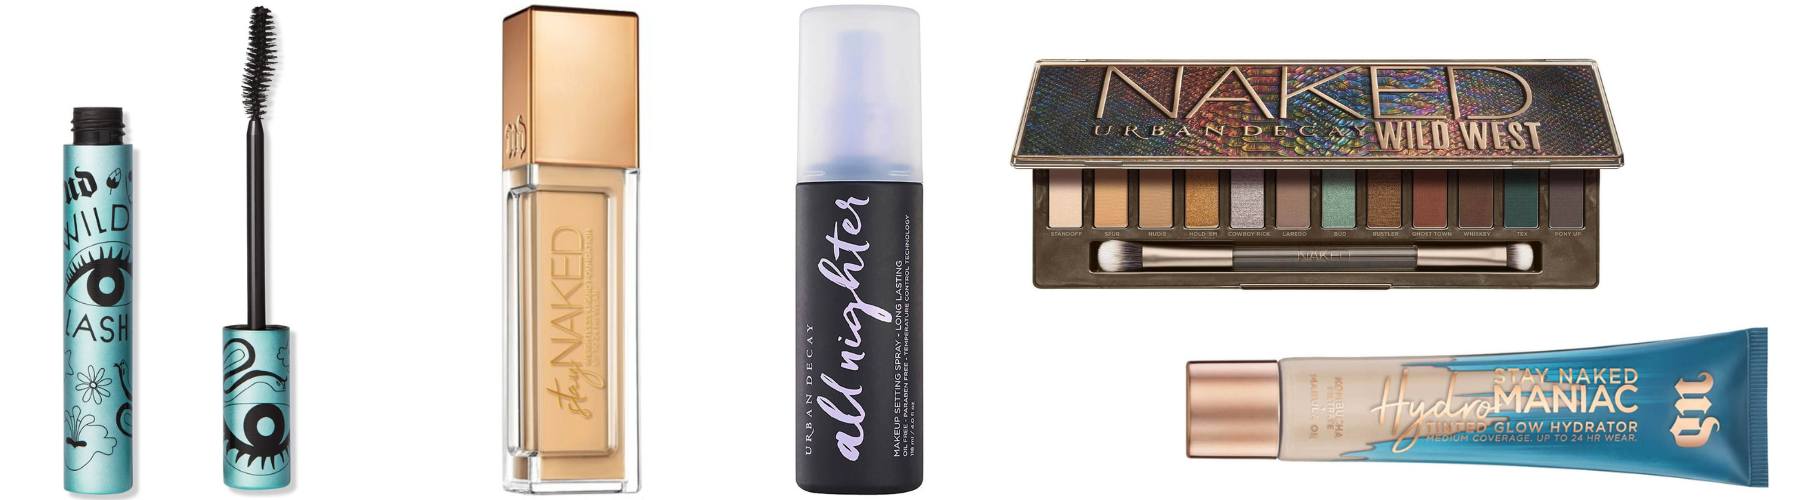 Is Urban Decay Cruelty Free, Ethical, and Sustainable?